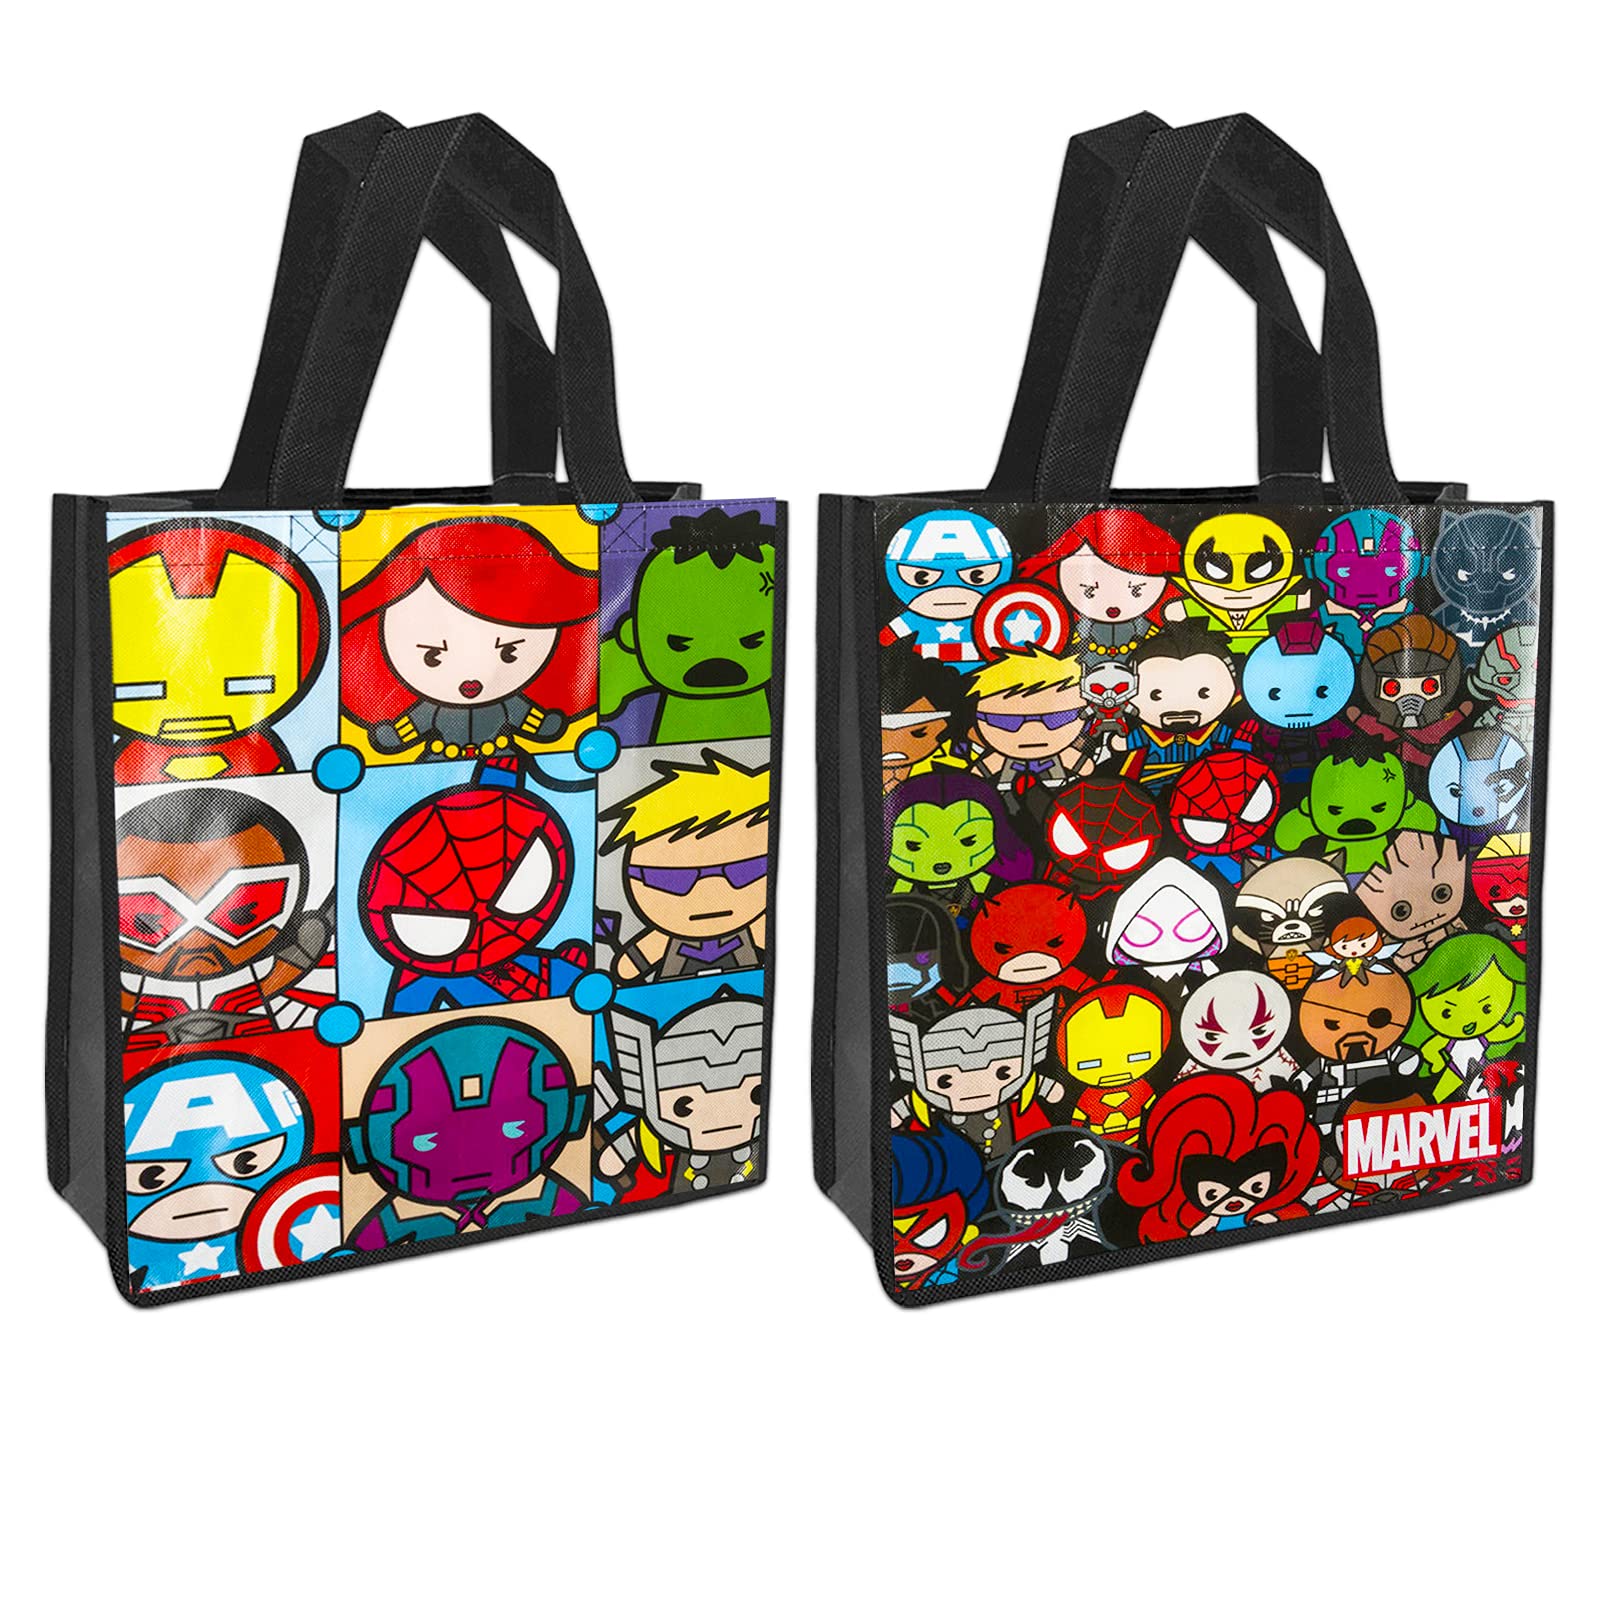 Marvel Shop Marvel Avengers Drawstring Bags Set Superhero Bag Bundle - 2 Pack Avengers Travel Bags Featuring Iron Man,Black Panther,Captain America,and More with Avengers Bookmark